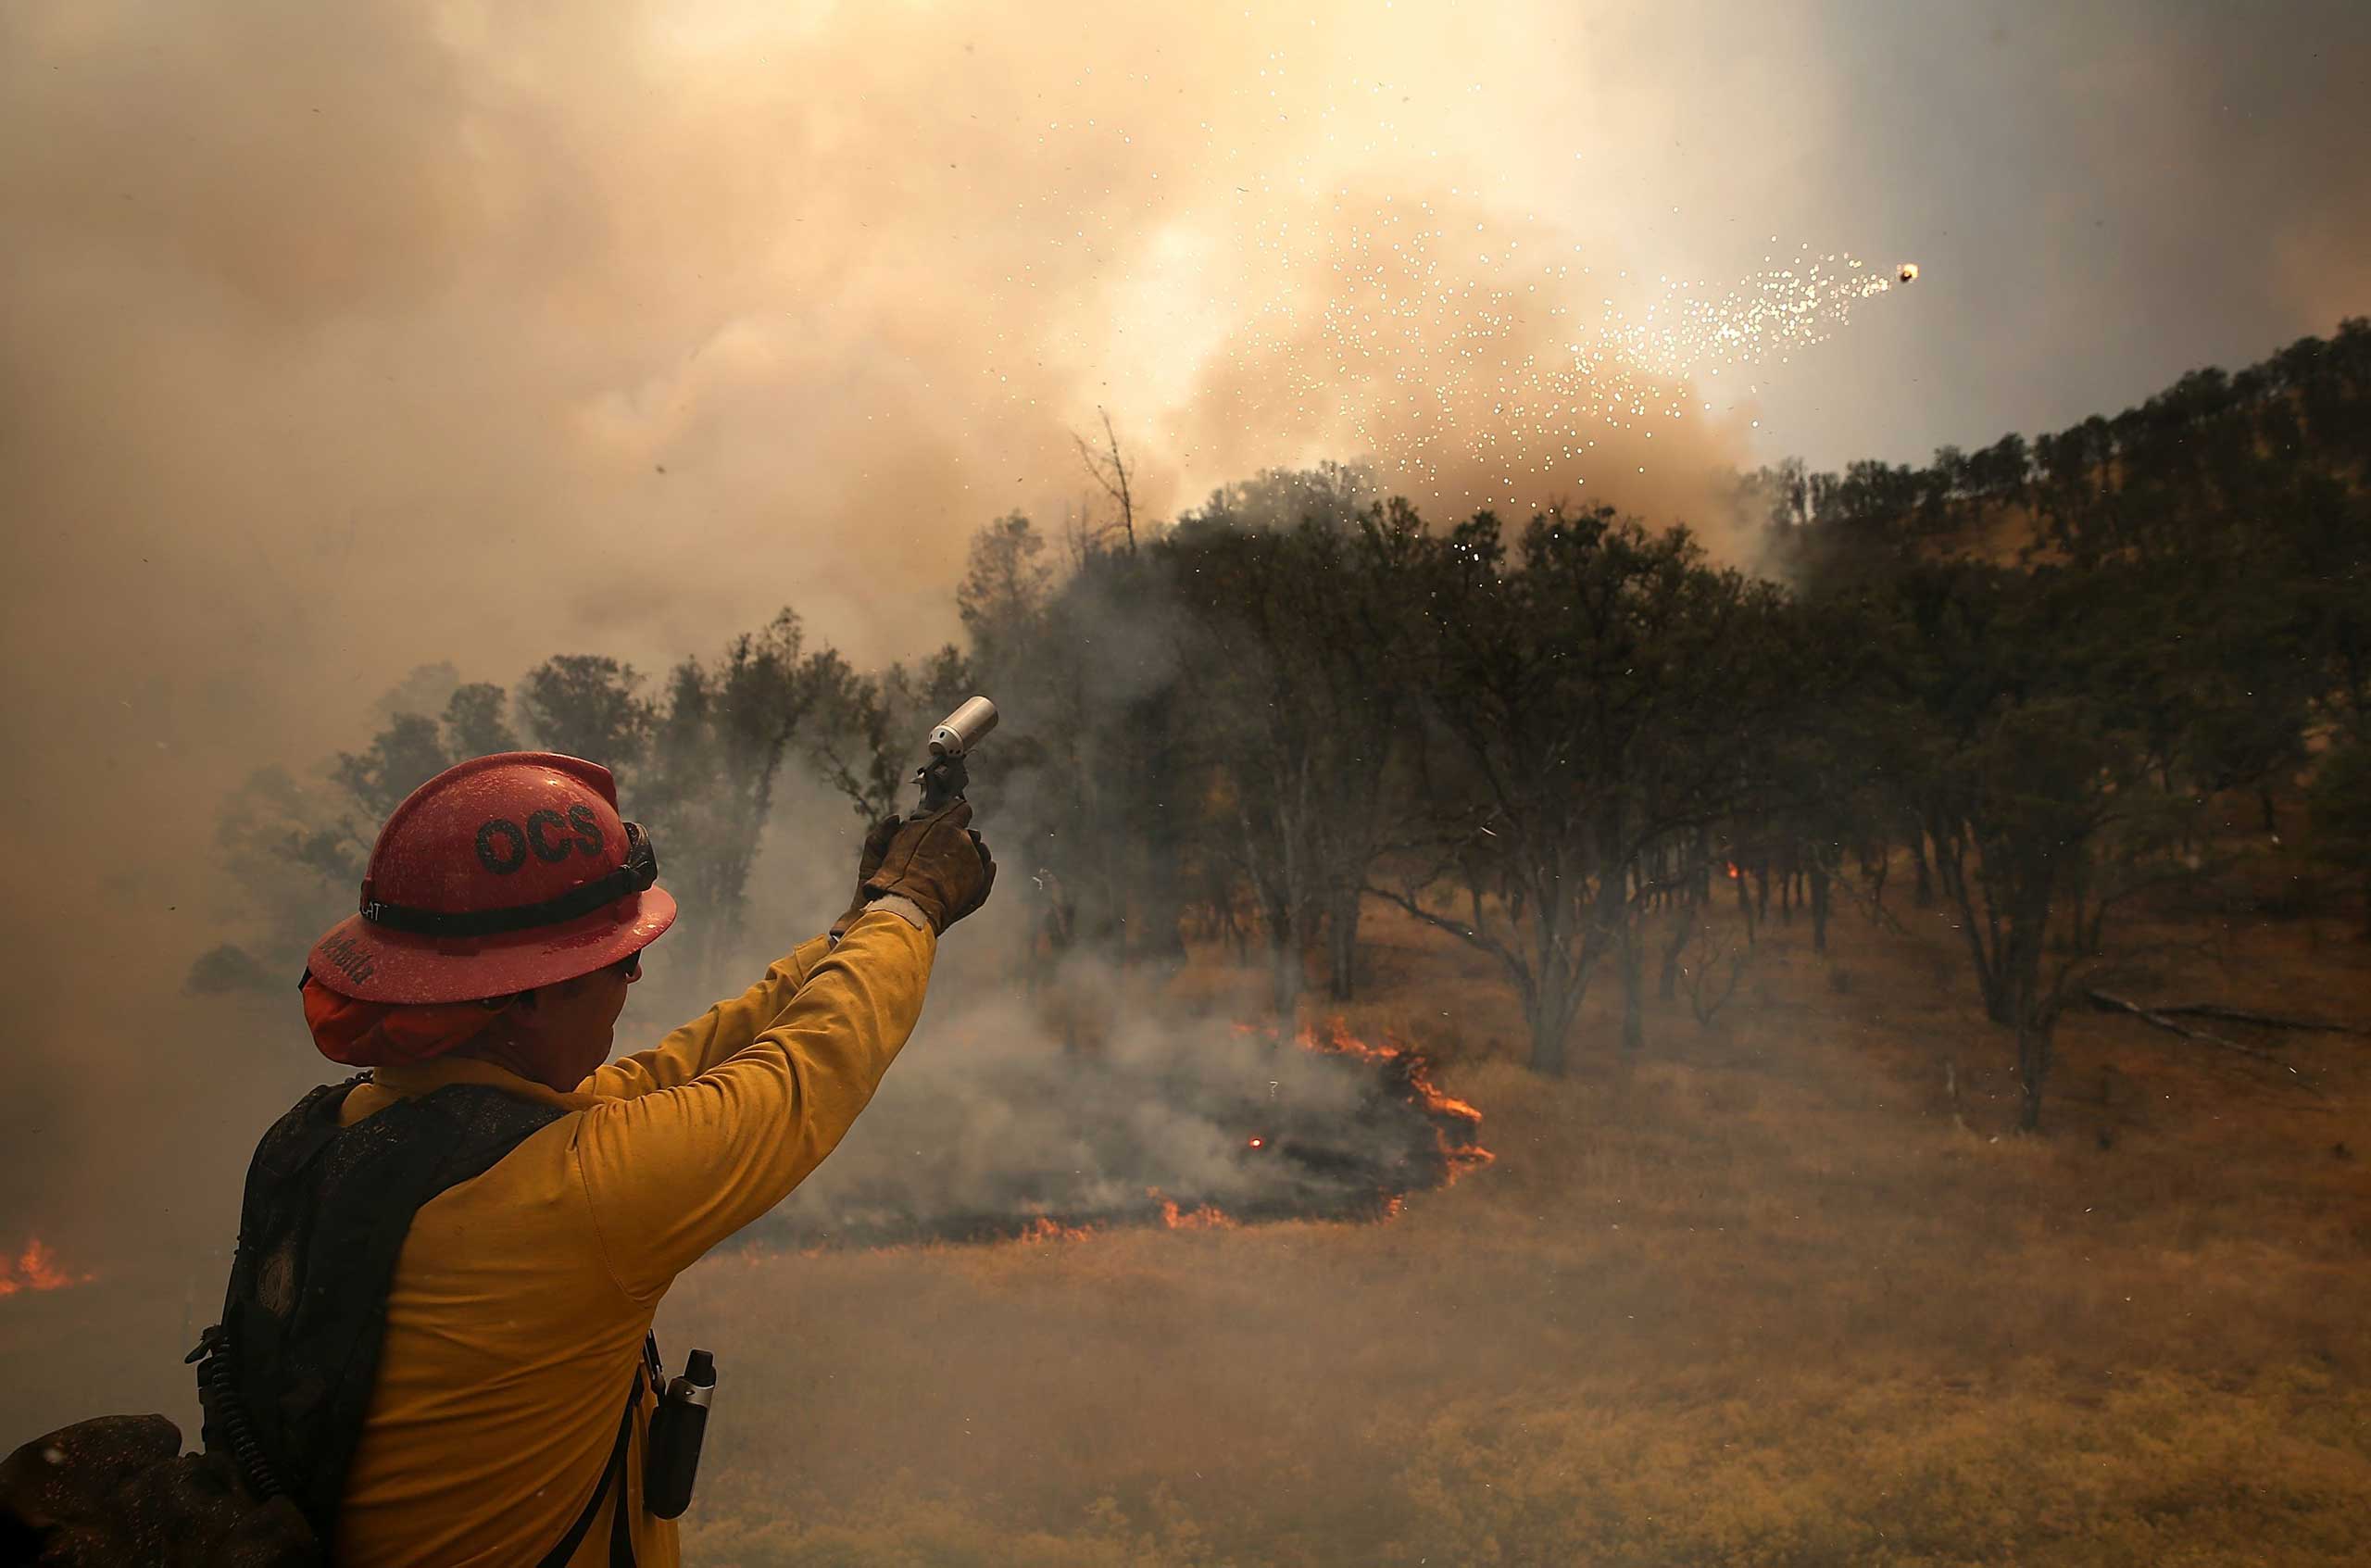 Oceanside Fire Department captain Greg DeAvila shoots a flare into dry brush during a burn operation to head off the Rocky Fire near Clearlake, Calif. on Aug. 2, 2015.